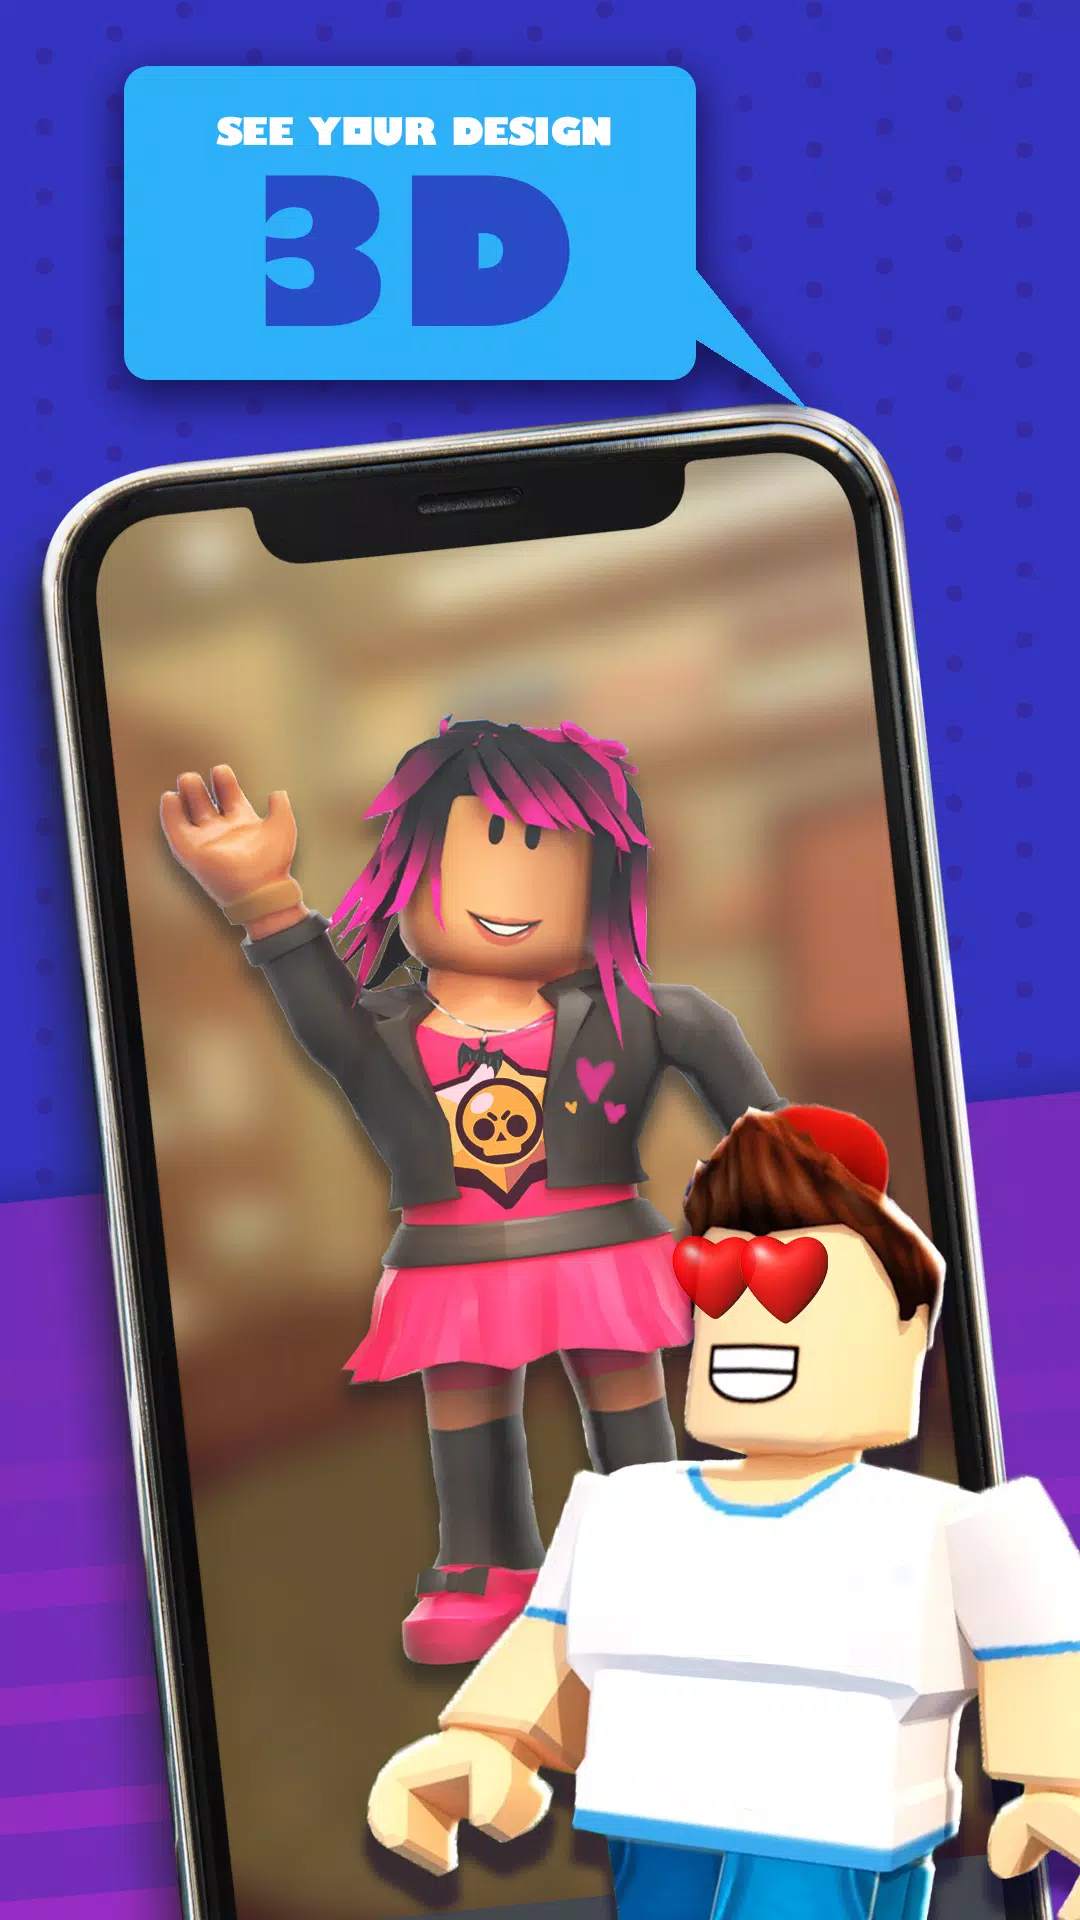 App Skins for Girls in roblox RobinSkin Android app 2021